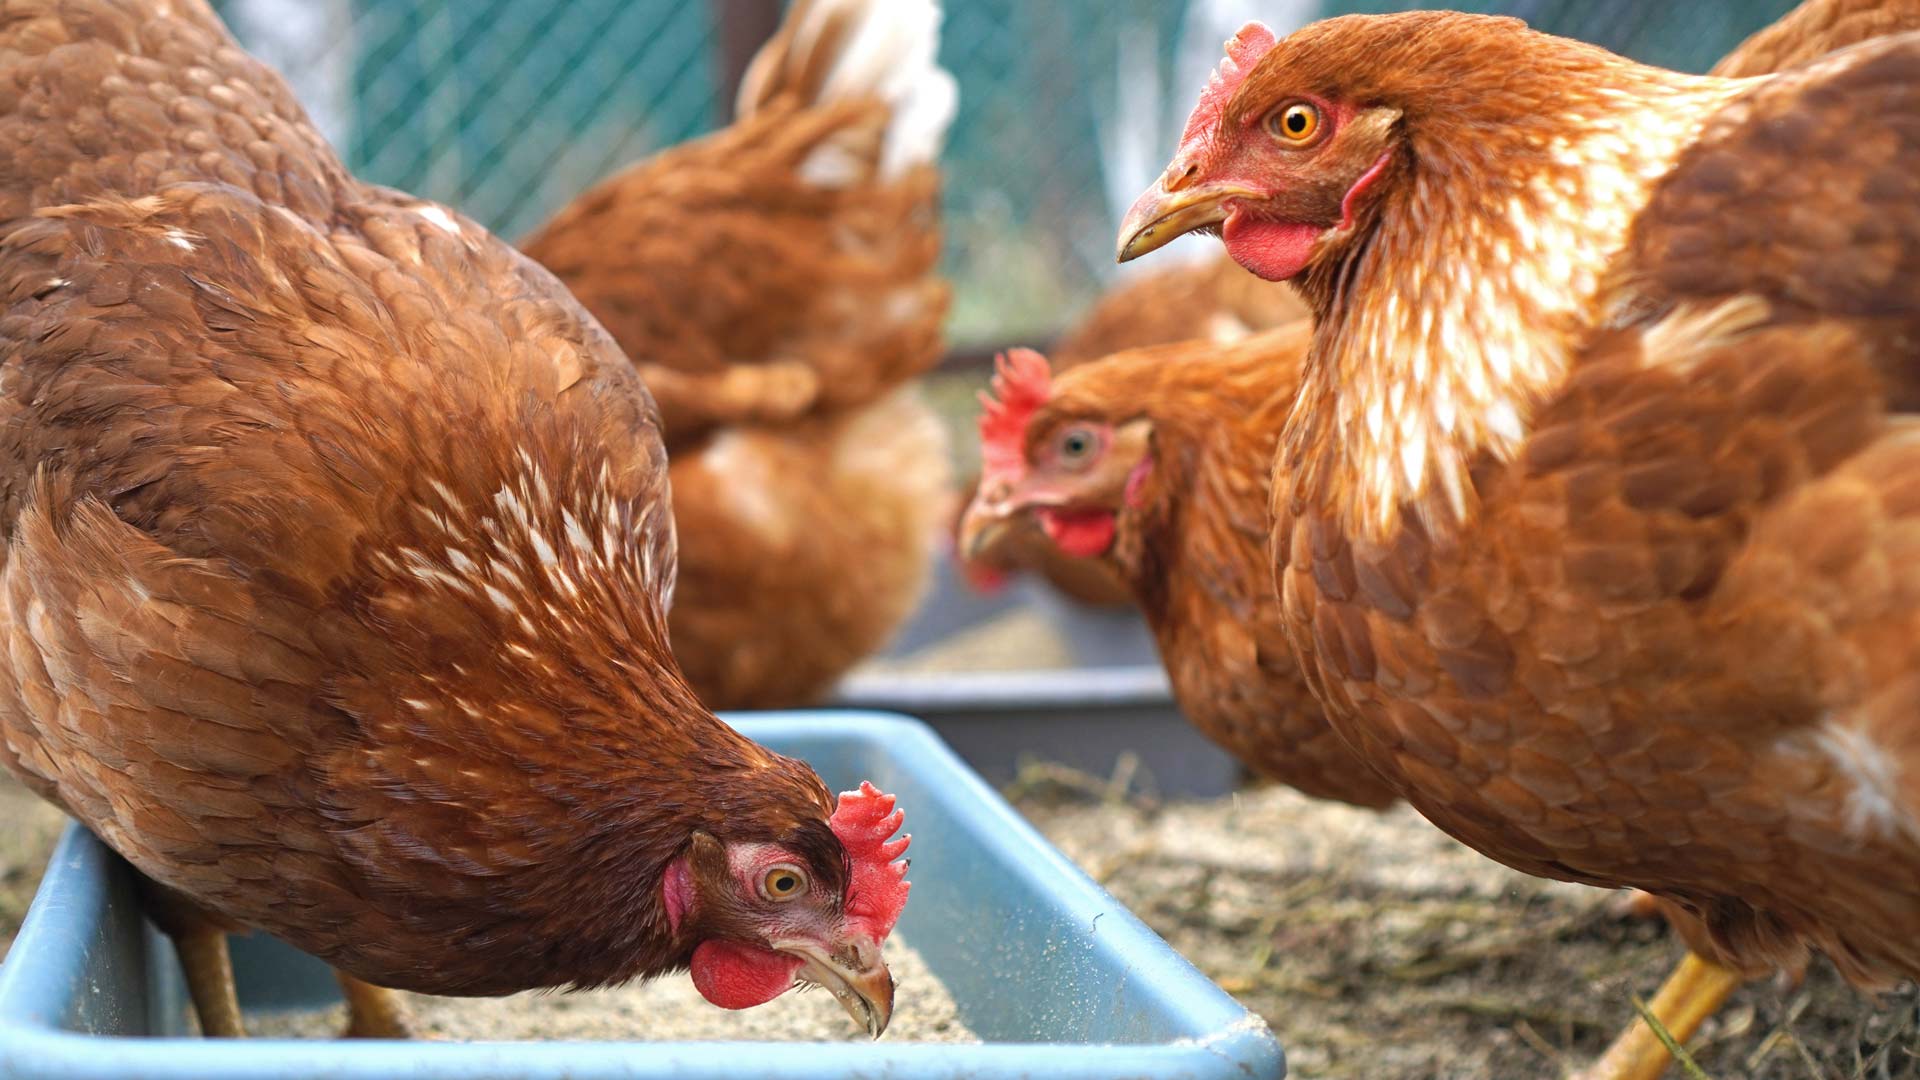 A flock of chickens eats corn-based feed.